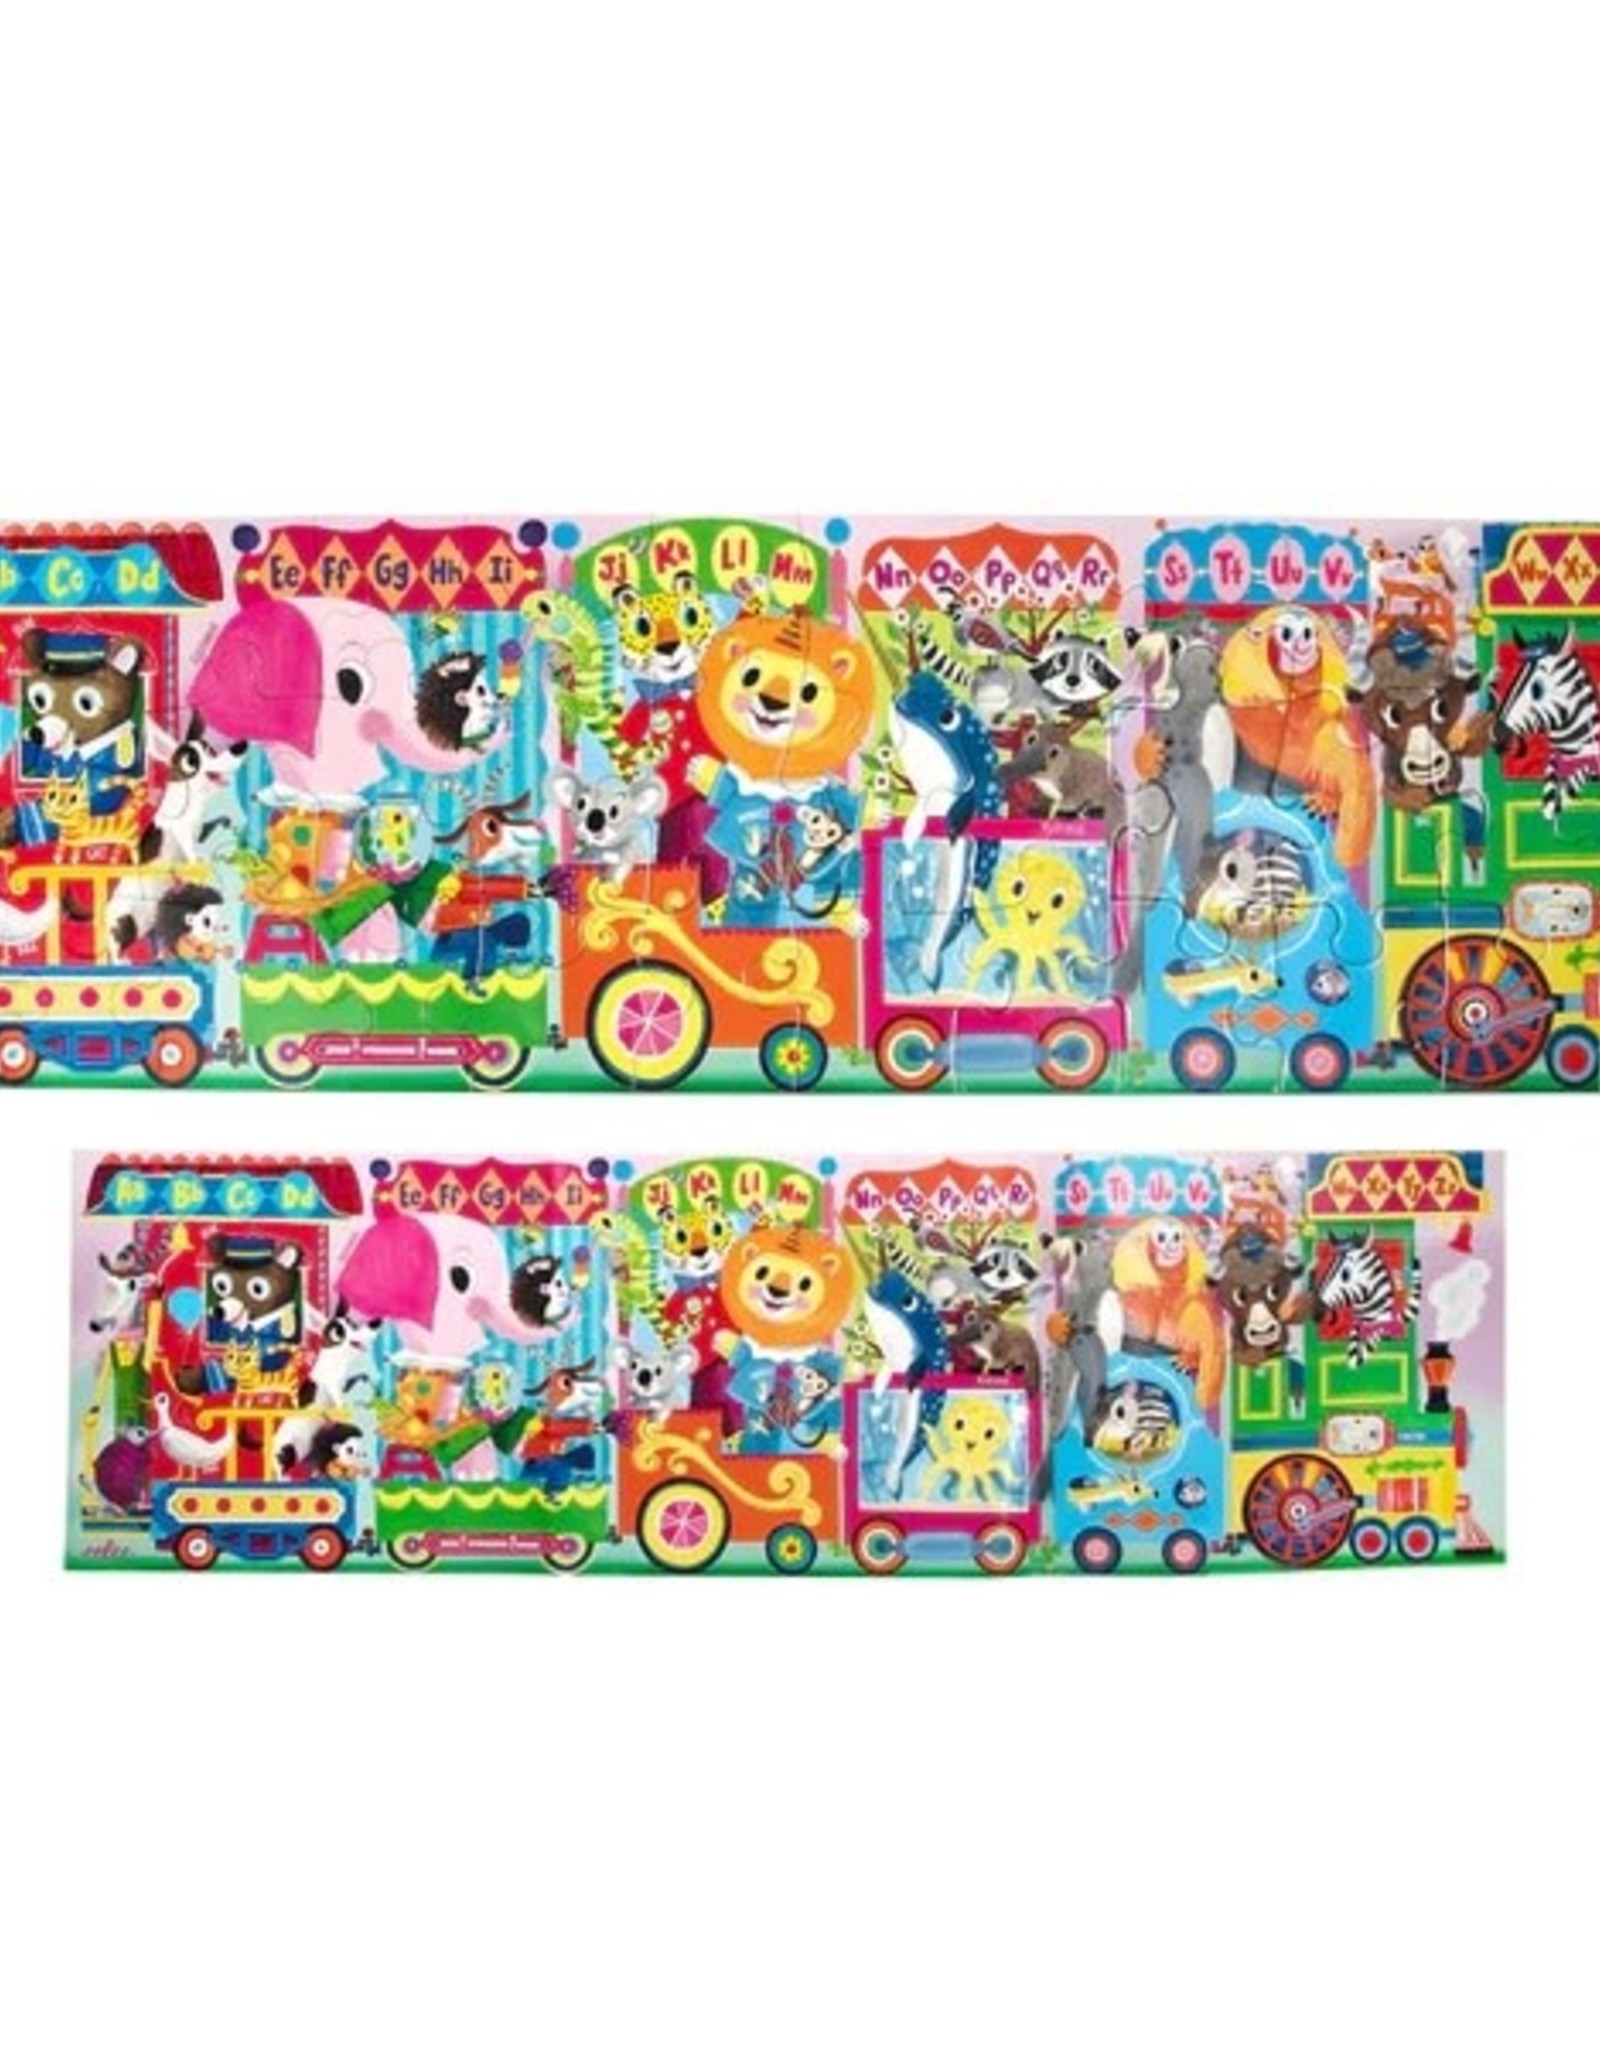 eeBoo ALPHABET TRAIN READY TO LEARN 36PC LONG PUZZLE